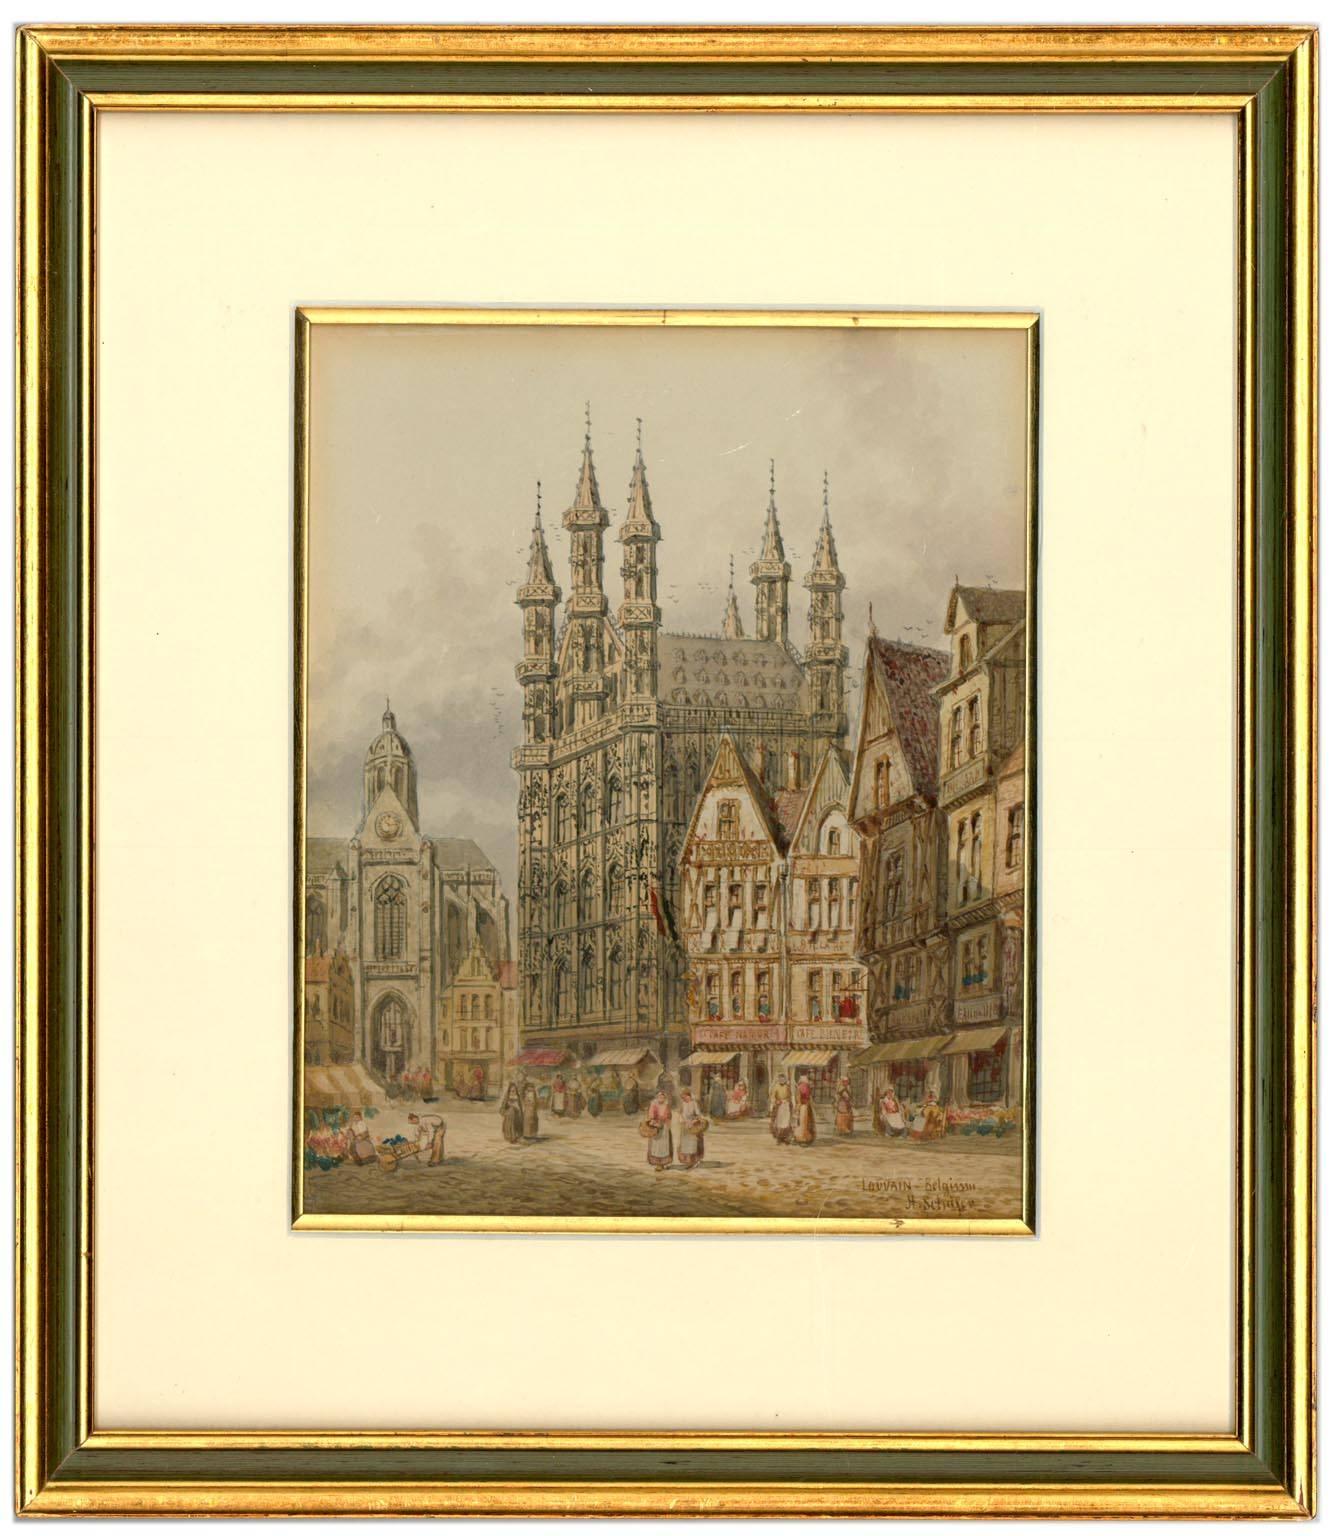 A superb market scene in watercolour by the listed British artist Henry Thomas Schaffer (1854-1915). Dates to the late 19th or early 20th century. Beautifully presented in a gilt frame and quality mount with gilt lining. Signed and inscribed in the